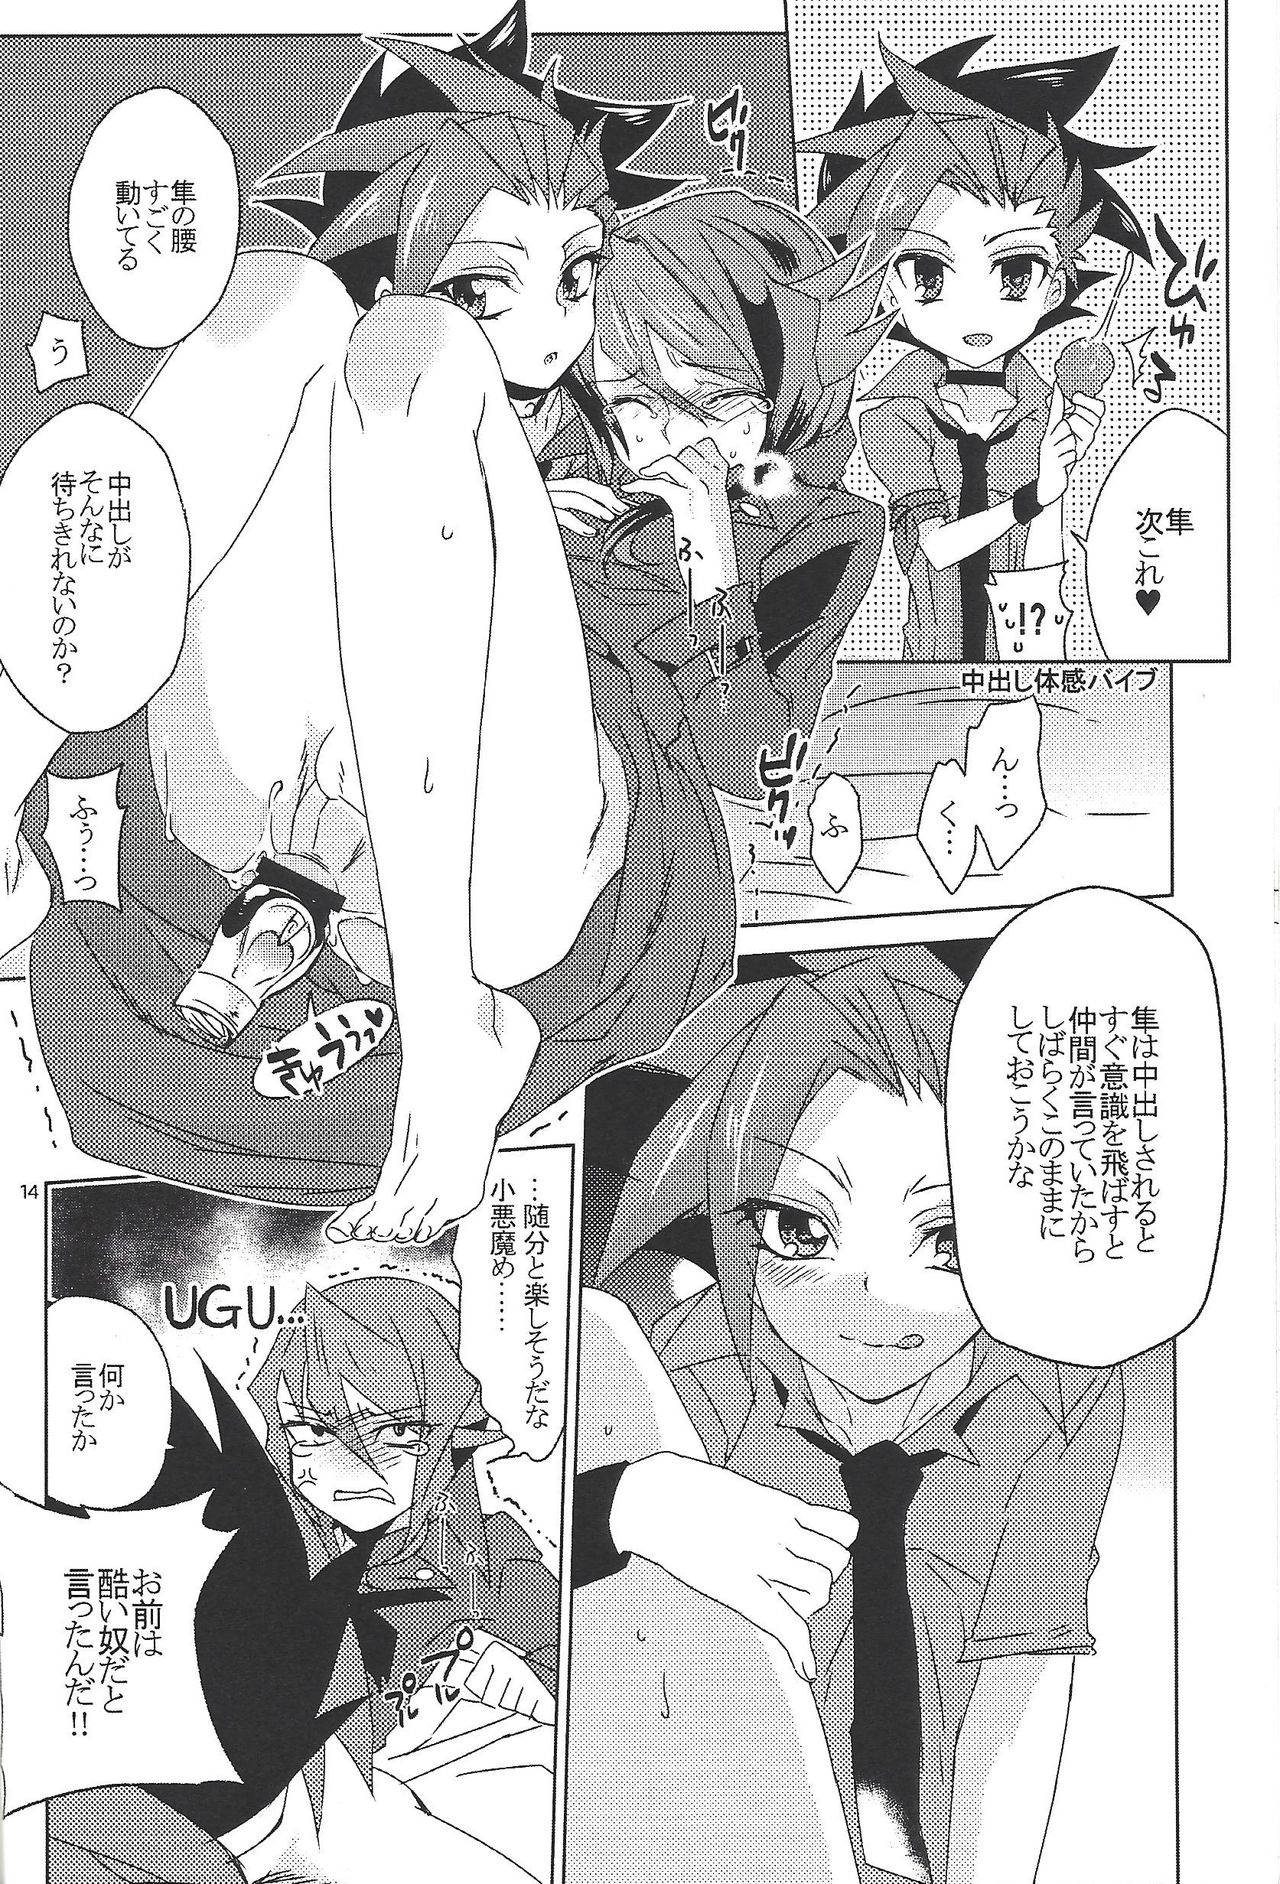 (Sennen Battle Phase 11) [ANNIELAURIE (Toyama Nanao)] SEX CHALLENGERS 02 (Yu-Gi-Oh! ARC-V) page 13 full